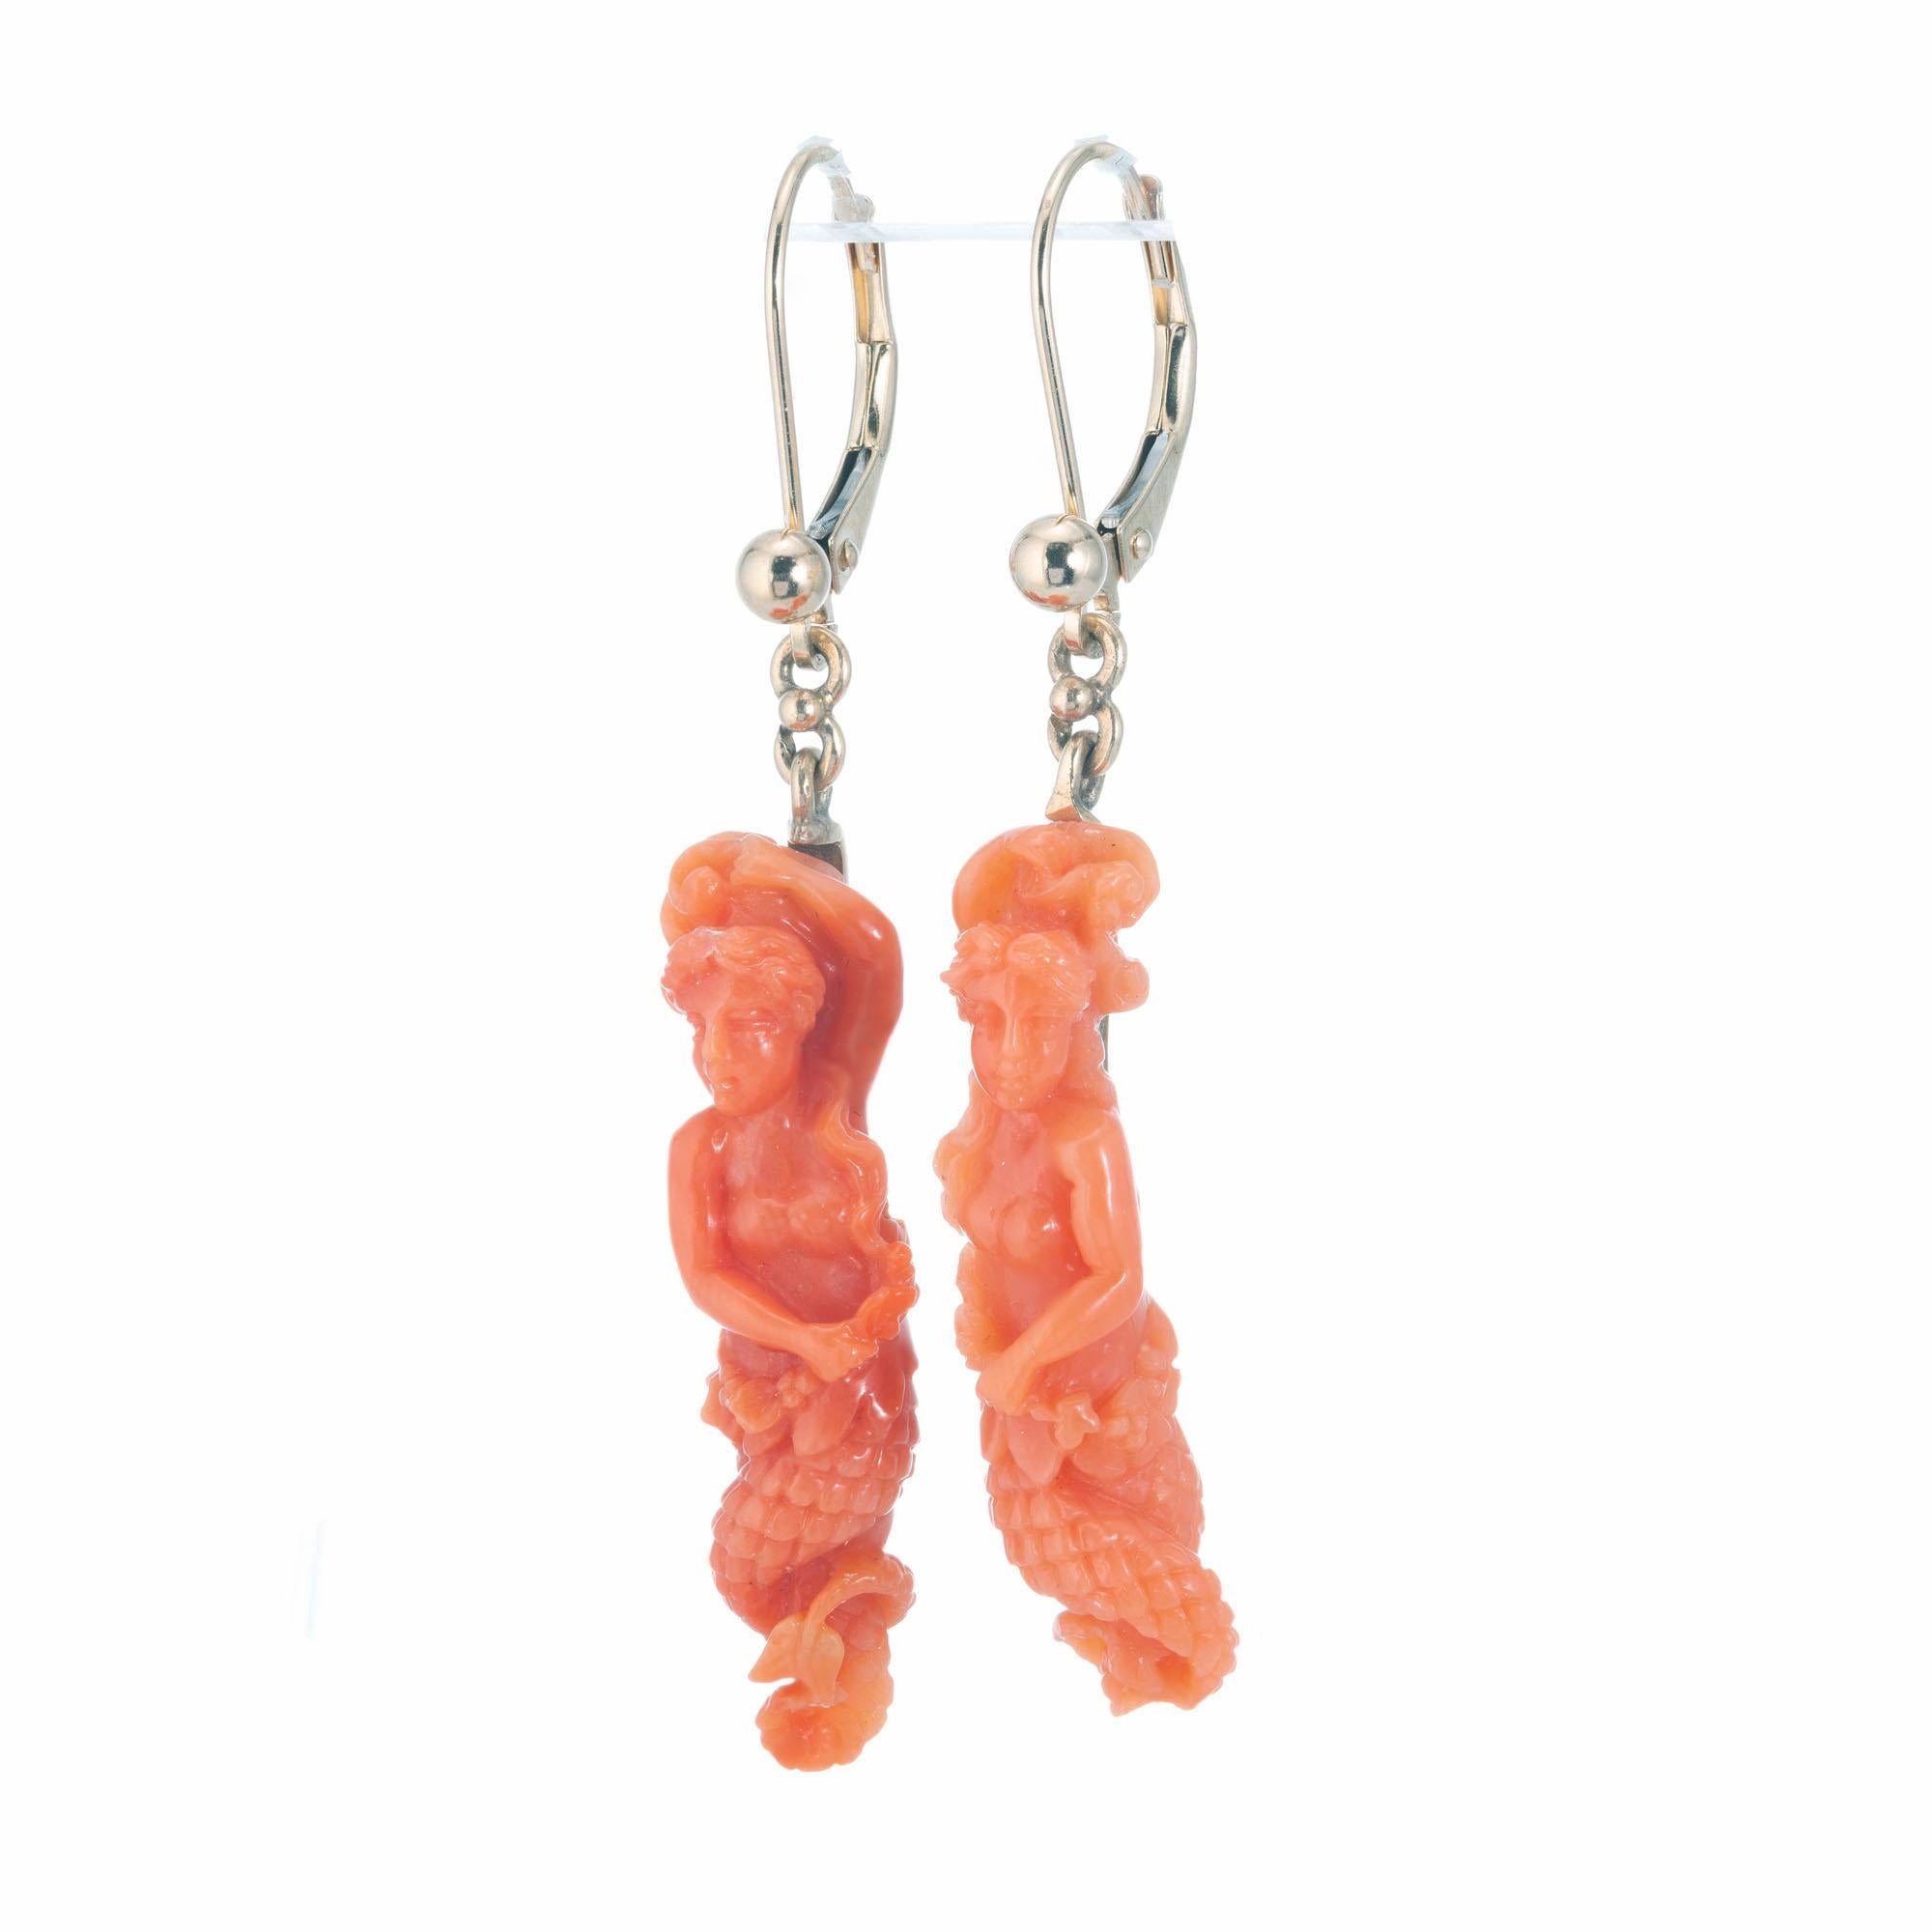 Carved 1900's mermaid natural GIA certified coral dangle earrings in 14k yellow gold. 

2 pierced orange coral mermaid carving GIA certificate # 2205747034
14k yellow gold 
Stamped: 14k 
4.9 grams
Top to bottom: 40.5mm or 1.5 Inch
Width: 7.5mm or